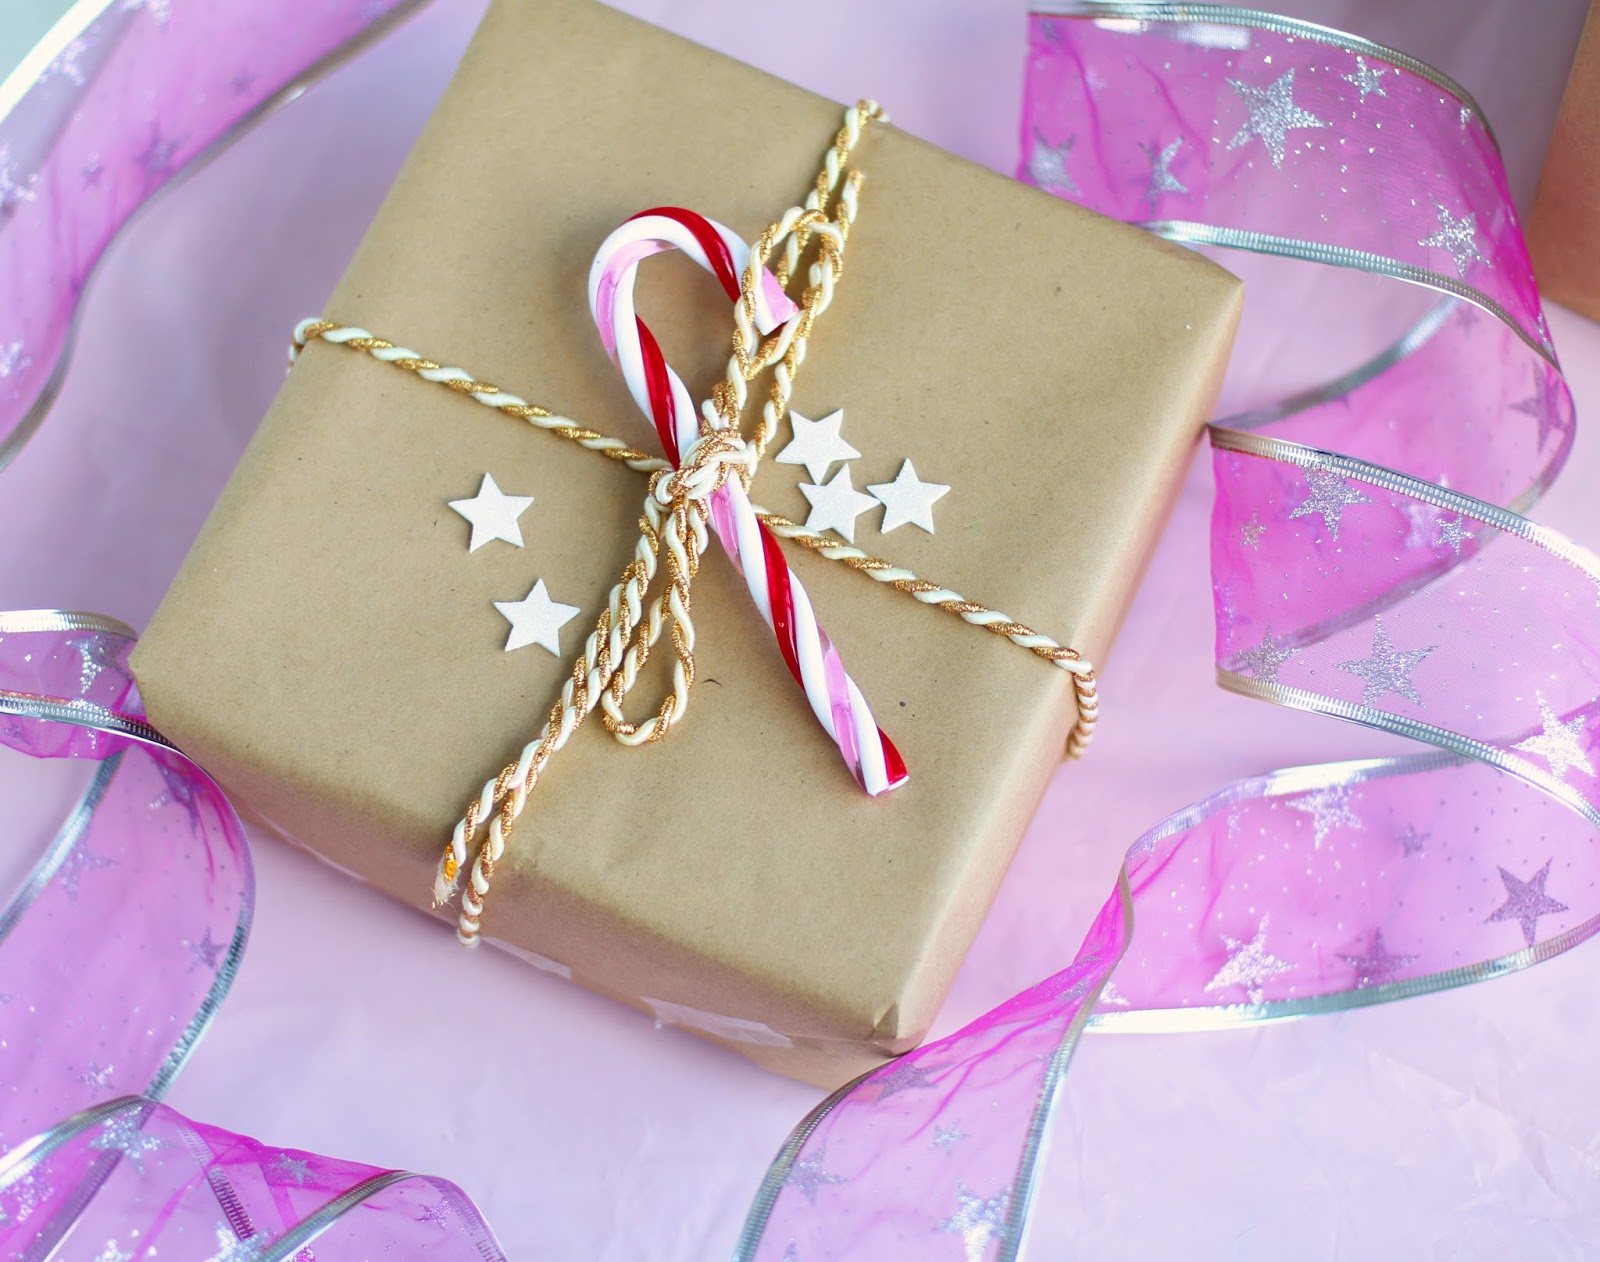 Pretty Pink wrapping inspiration